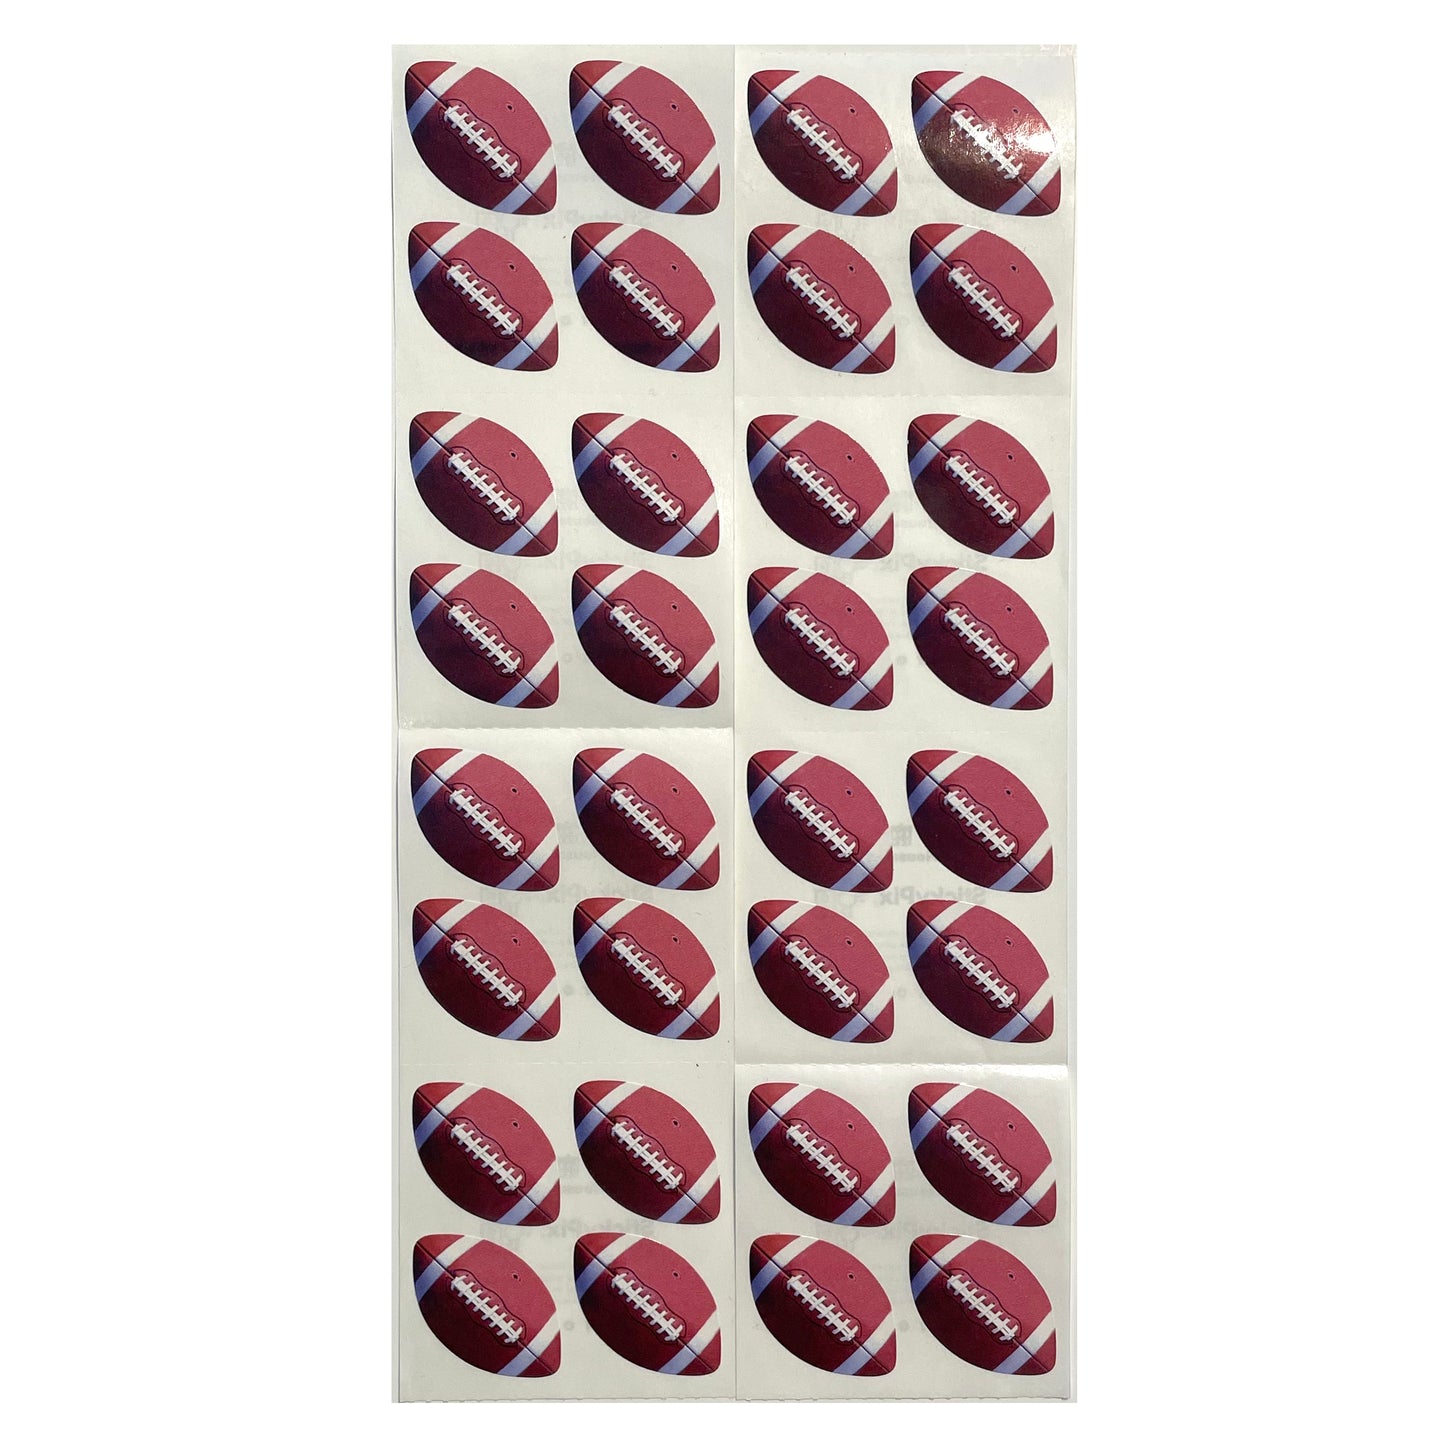 Paper House: Football stickers - 8 pcs